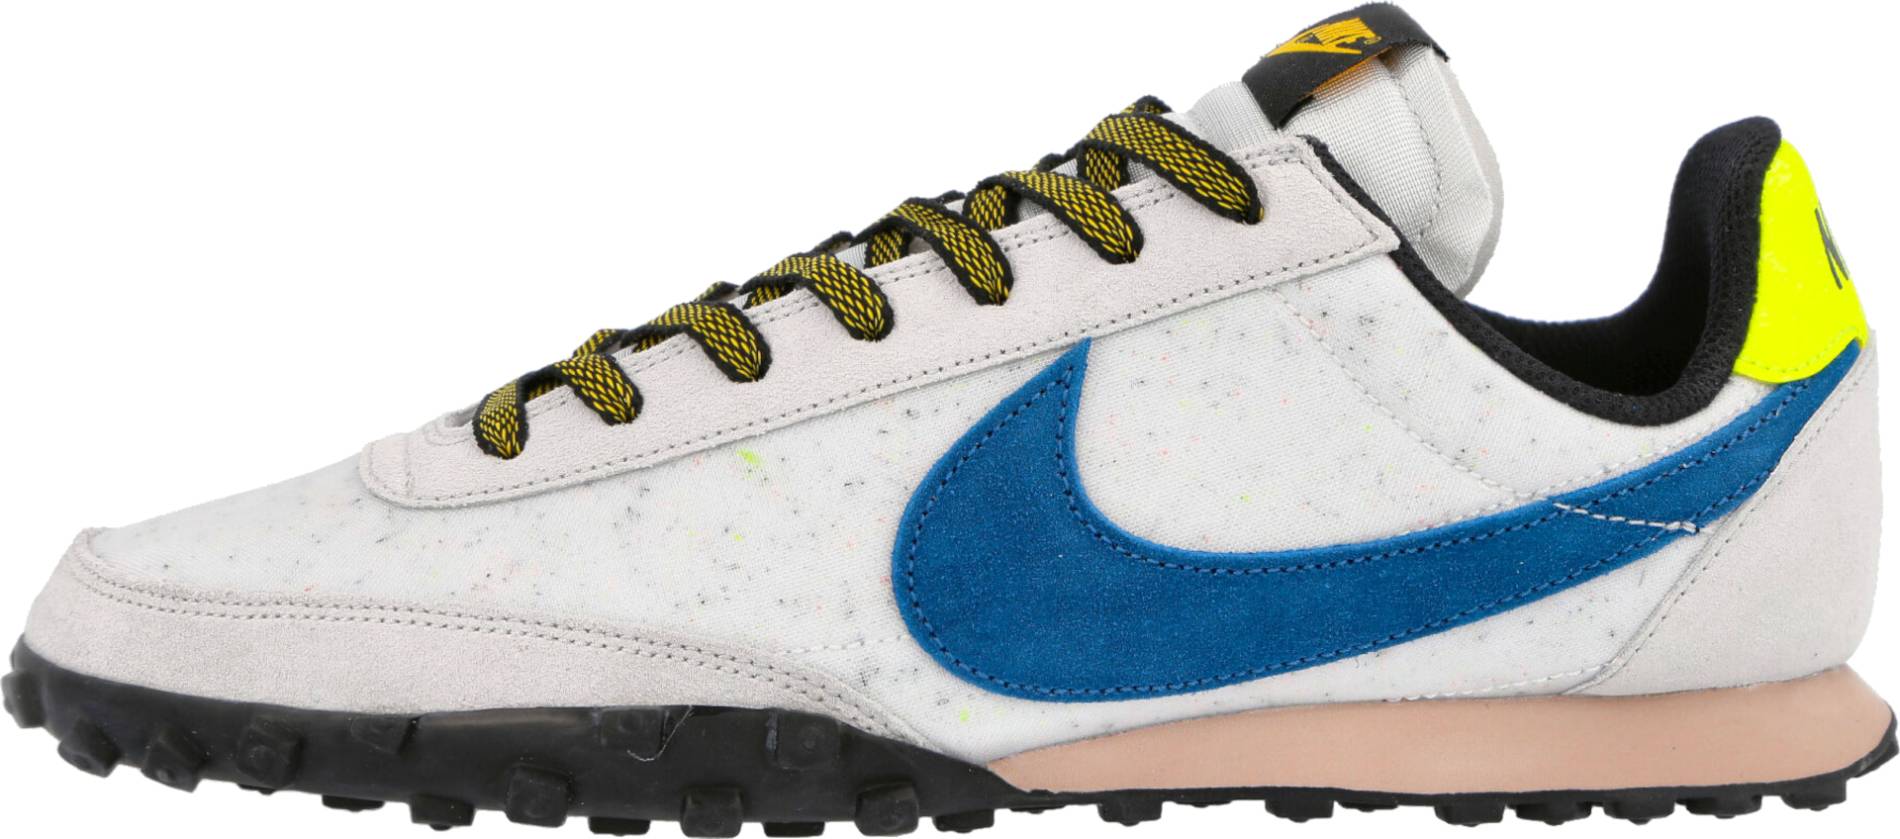 Nike original nike waffle running shoes Waffle Racer sneakers in 5 colors (only $30) | RunRepeat